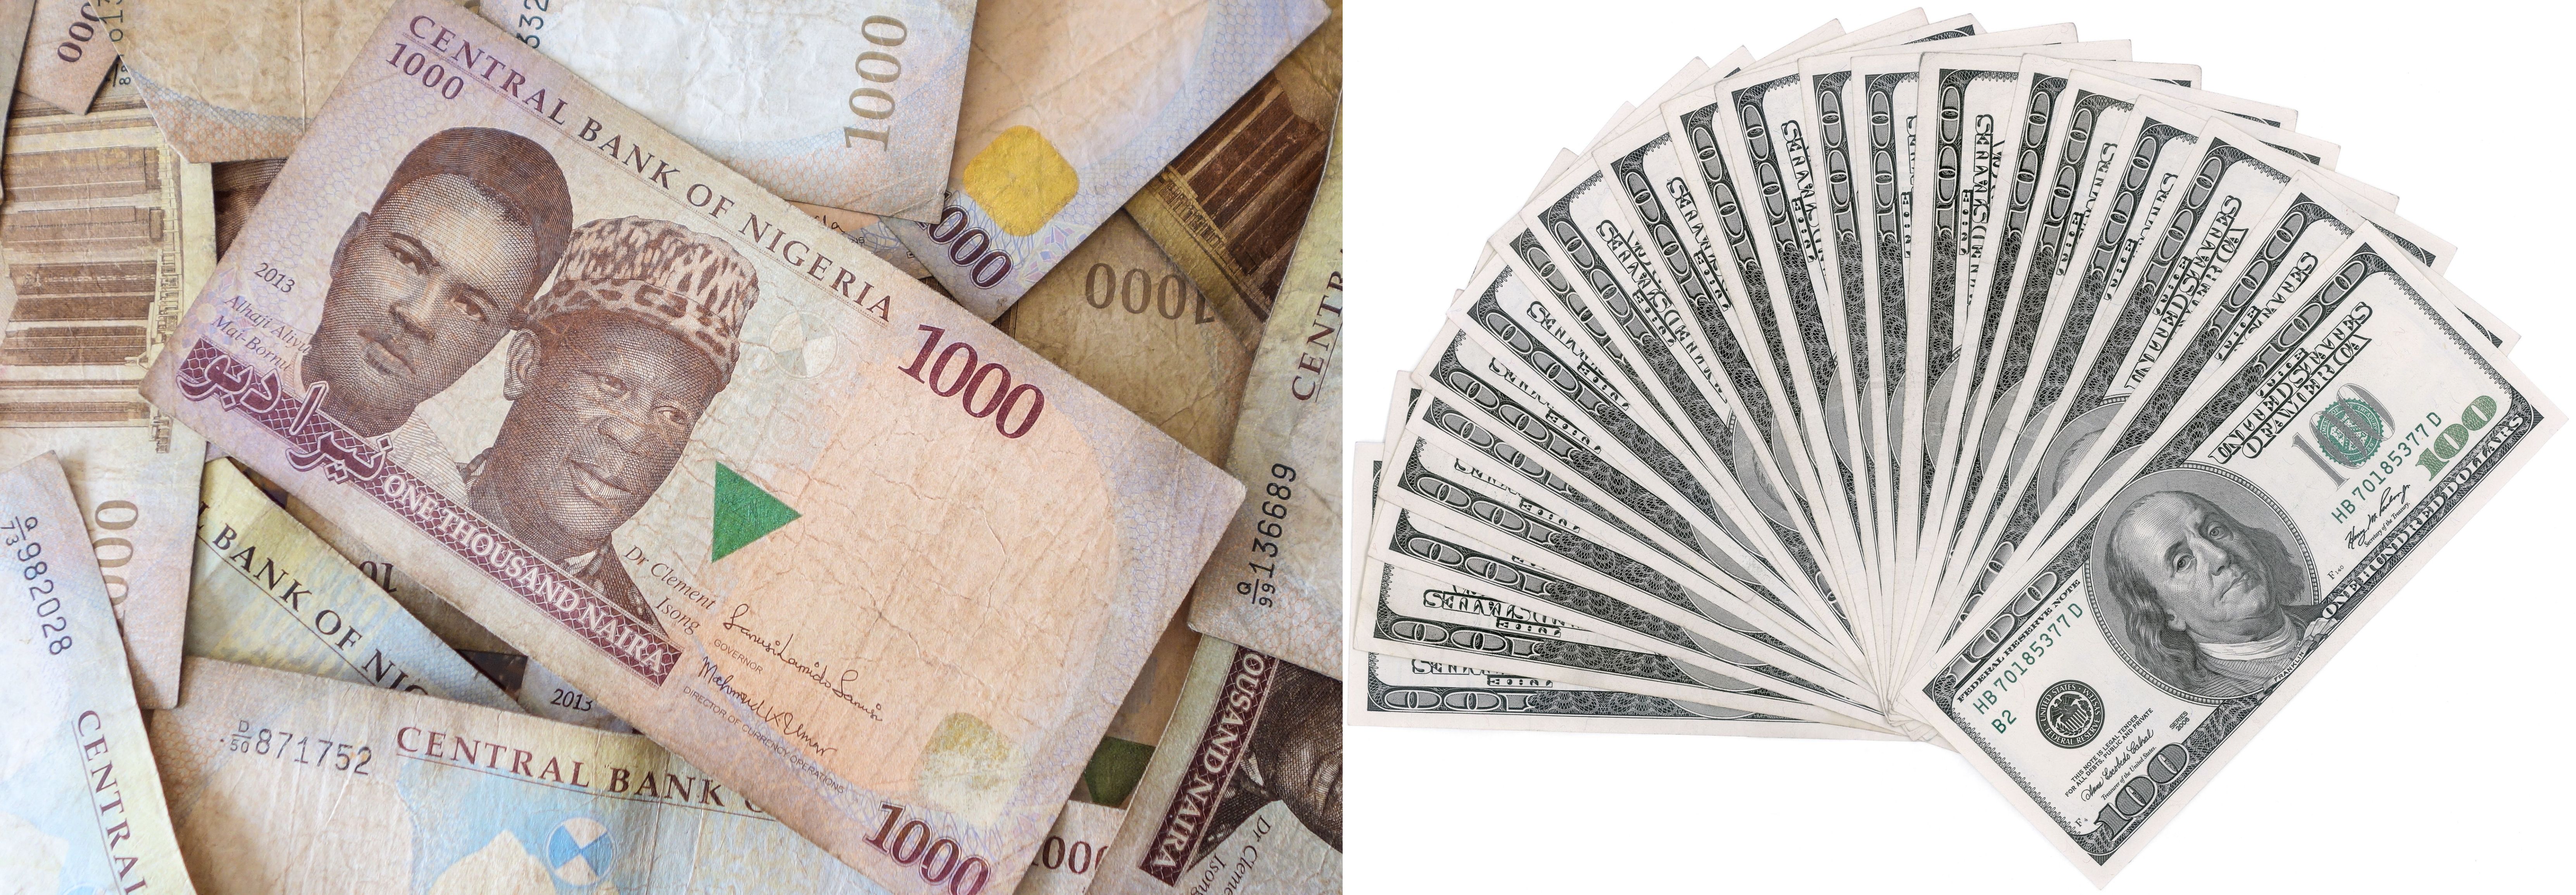 CBN Revealed The Secret Behind Nigeria Naira Waxing Stronger